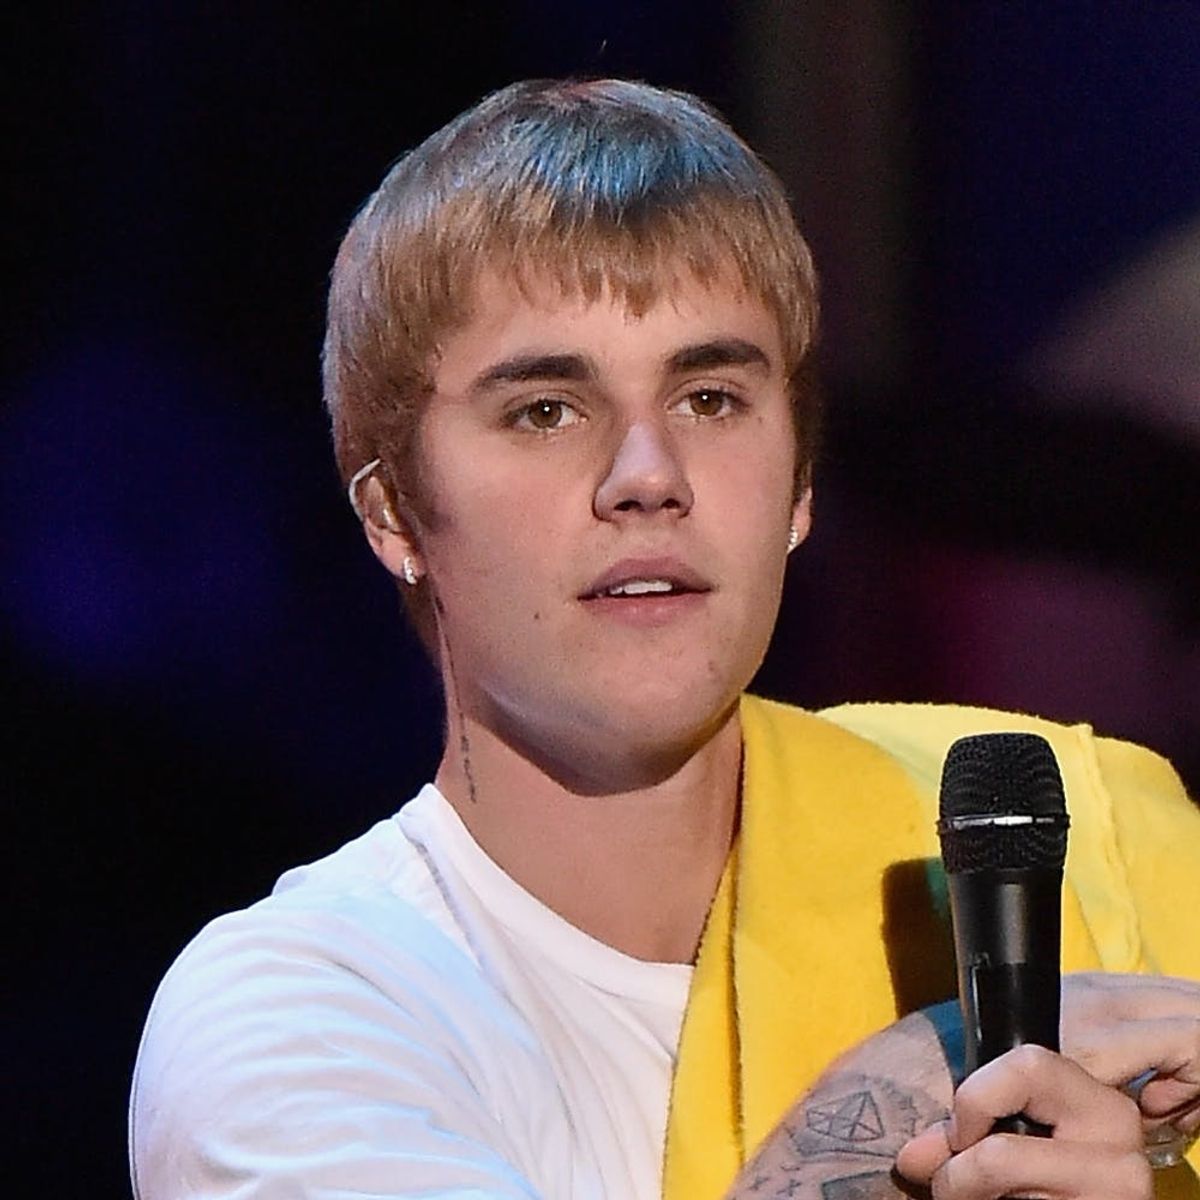 Fans Are Wondering WTF Is Up With Justin Bieber’s Strange New Look